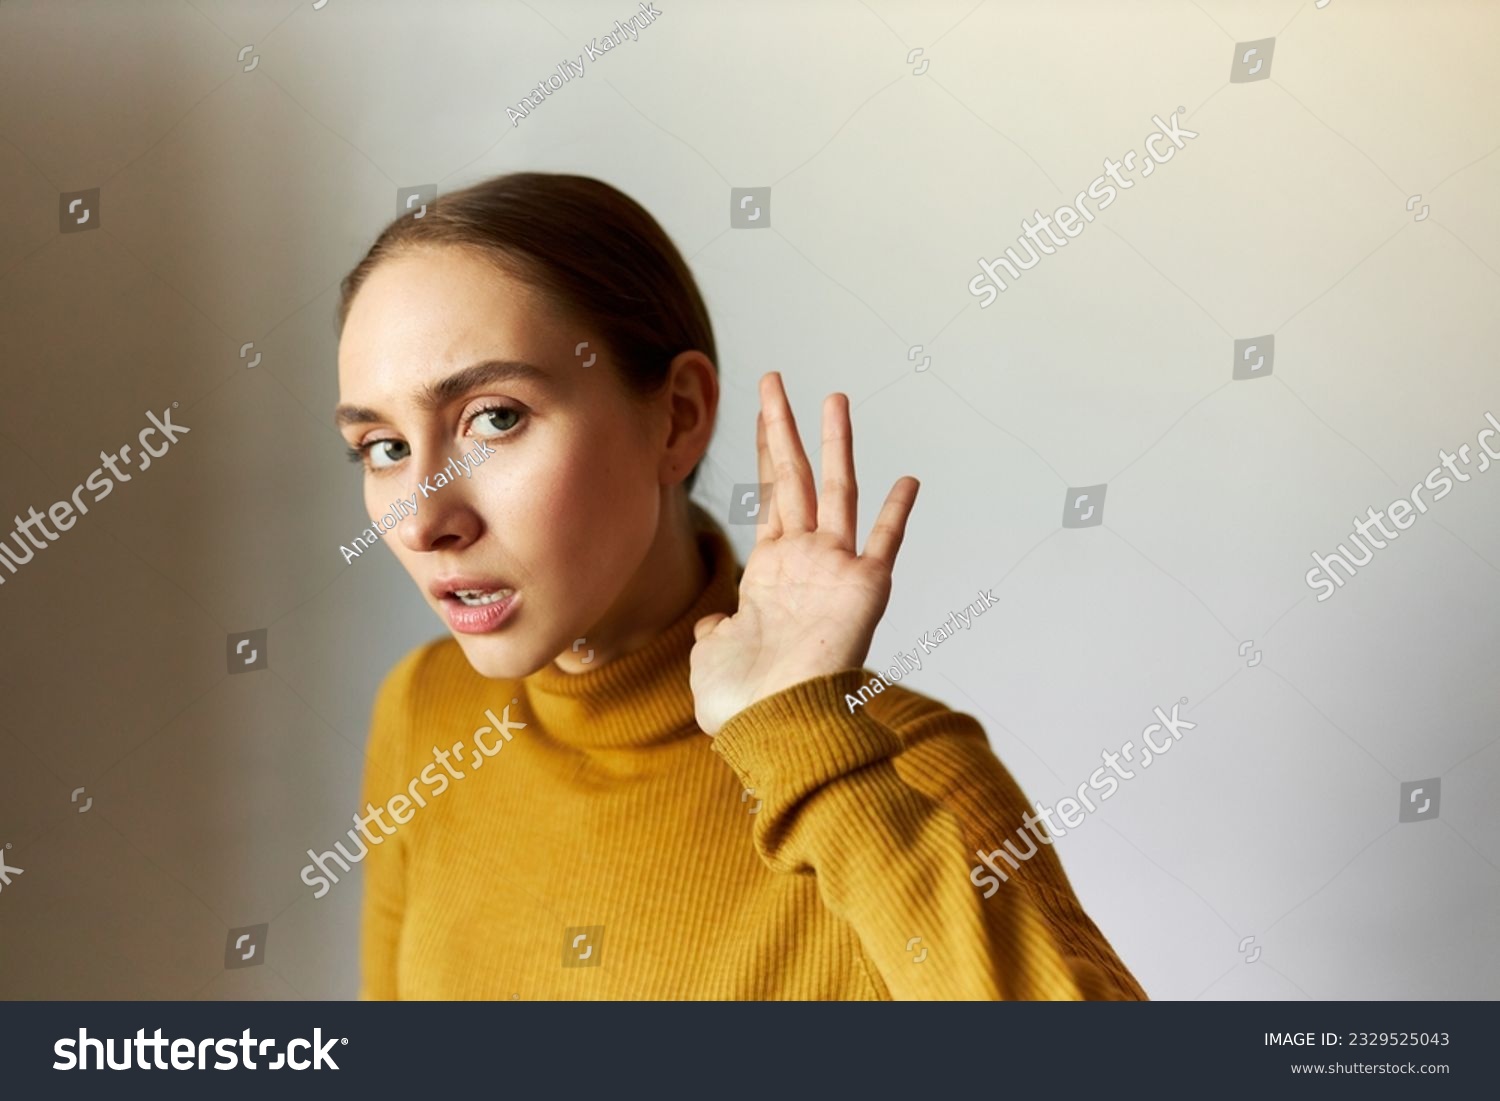 Portrait of concentrated anxious female eavesdropping holding head next to ear, listening carefully to strange sounds, feeling scared, standing against gray studio background with opened mouth #2329525043